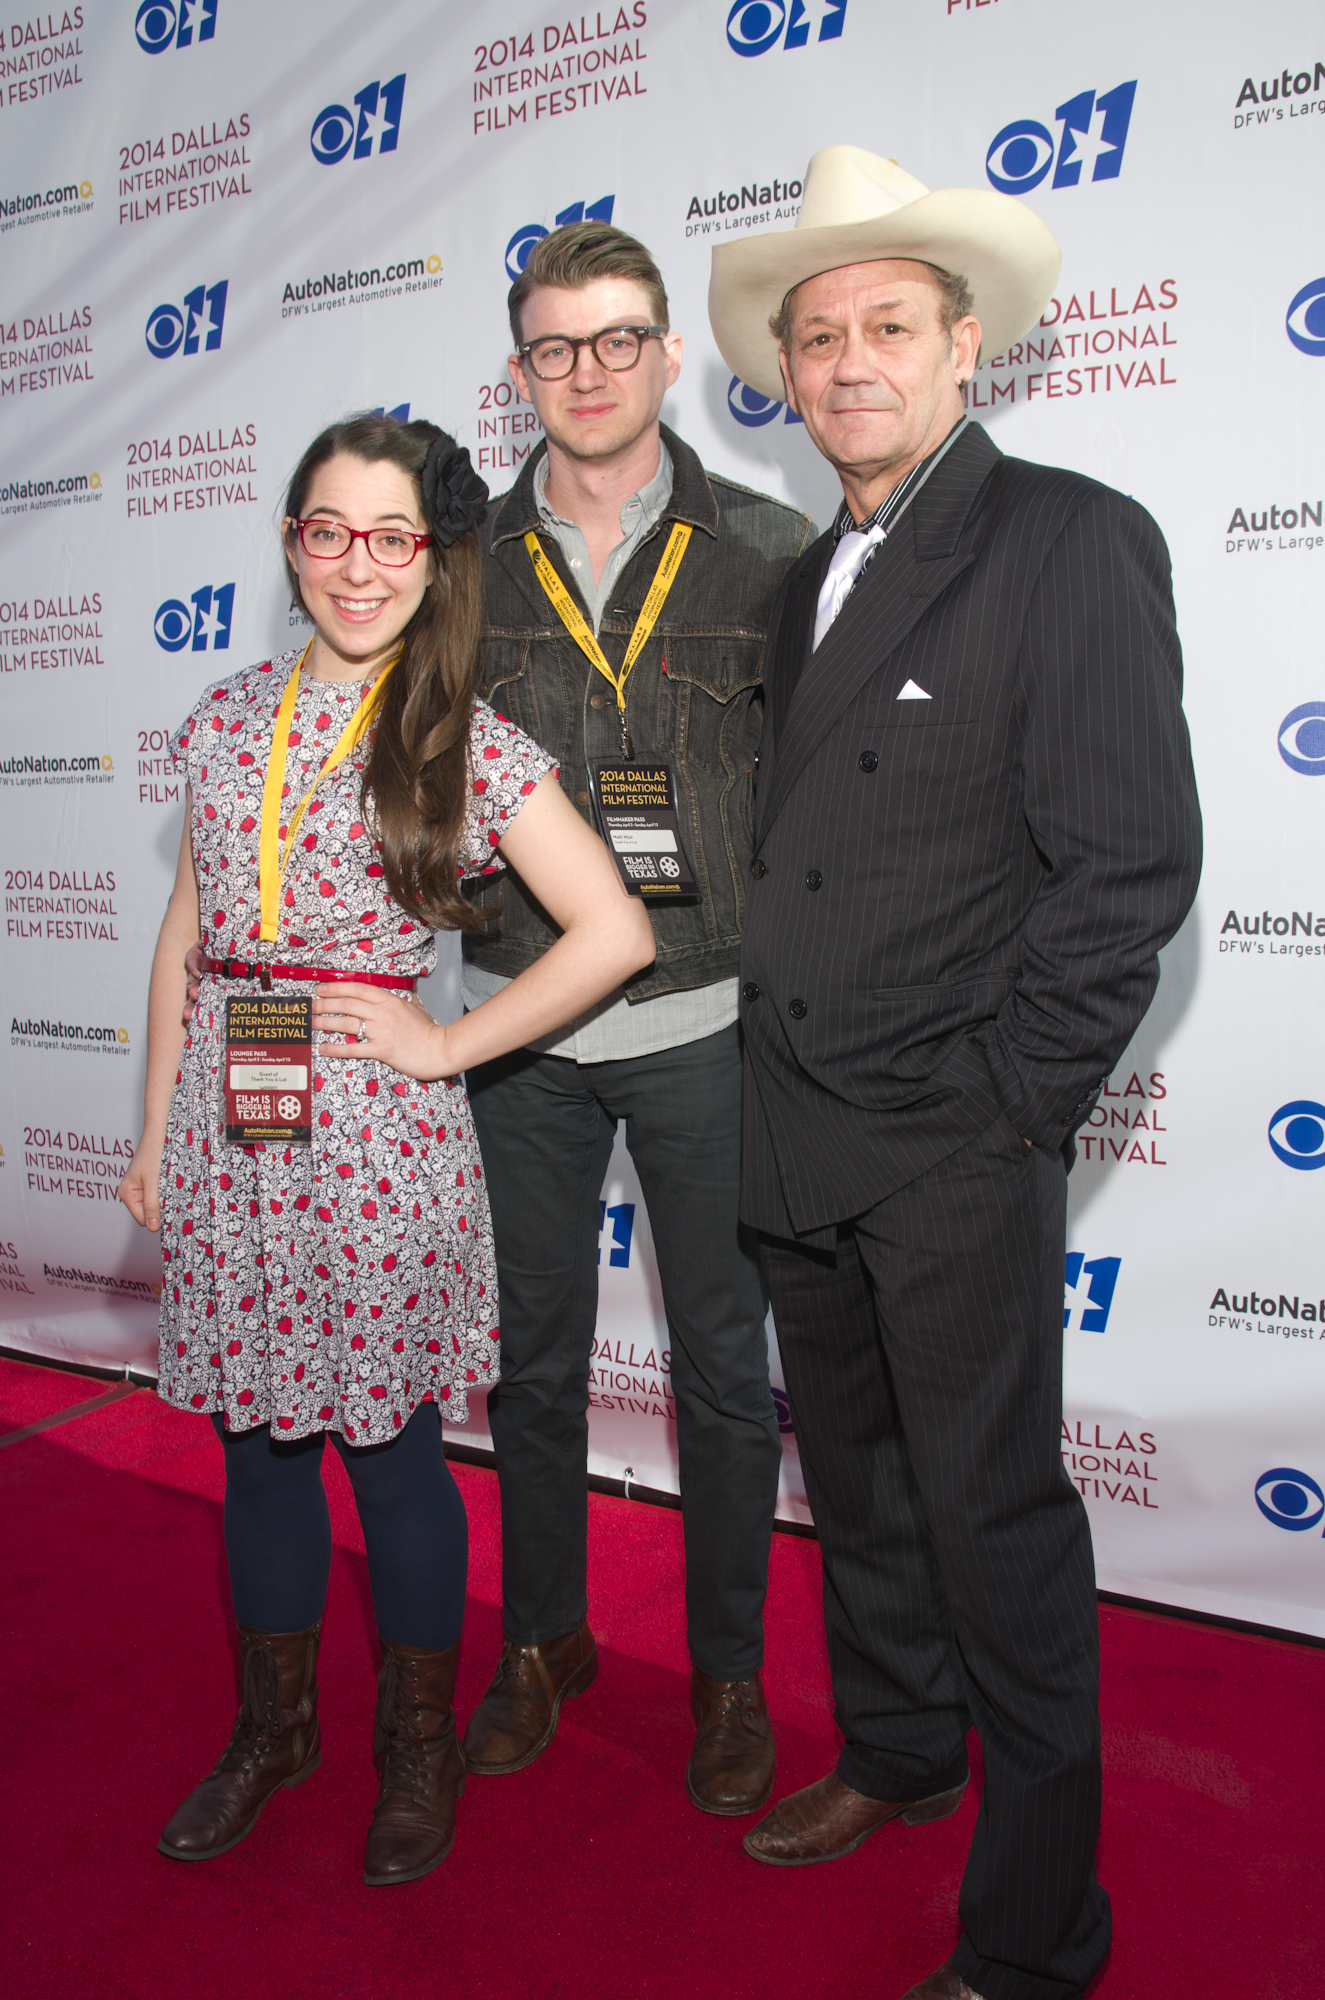 Actress Kaci Beeler with Director Matt Muir and Co-Star James Hand for Thank You A Lot at the 2014 Dallas International Film Festival.